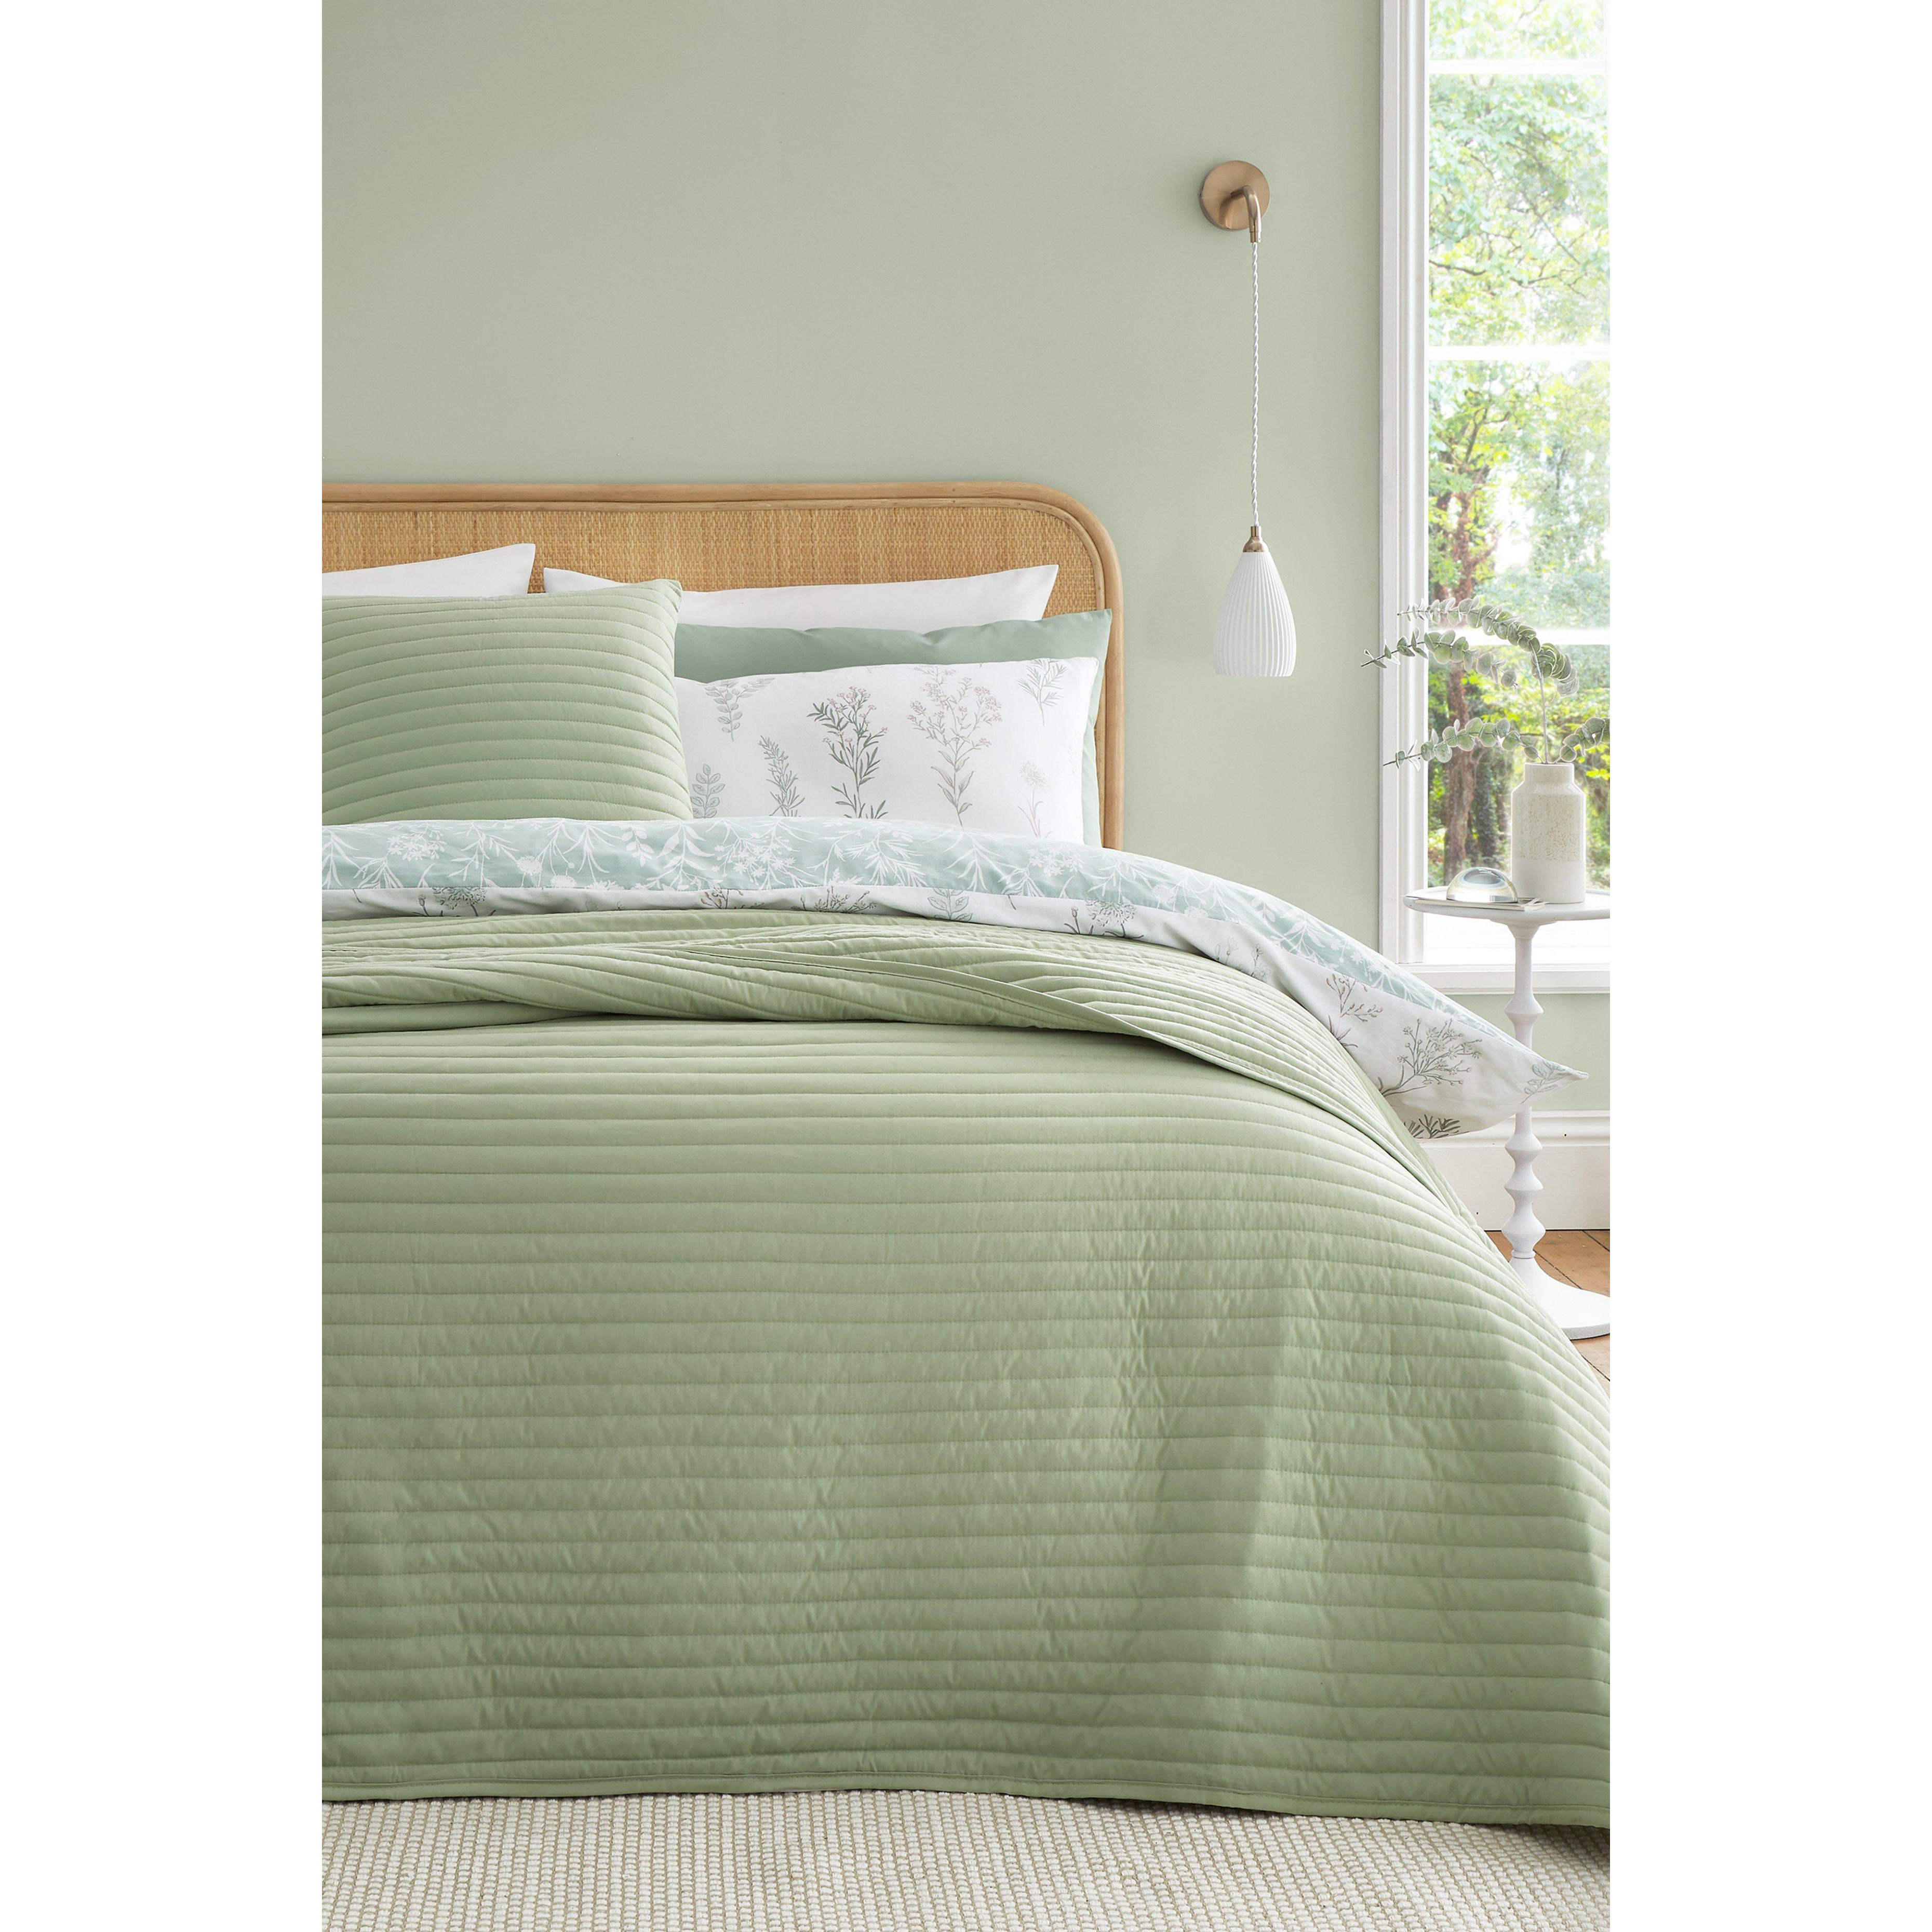 'Quilted Lines' Bedspread - image 1